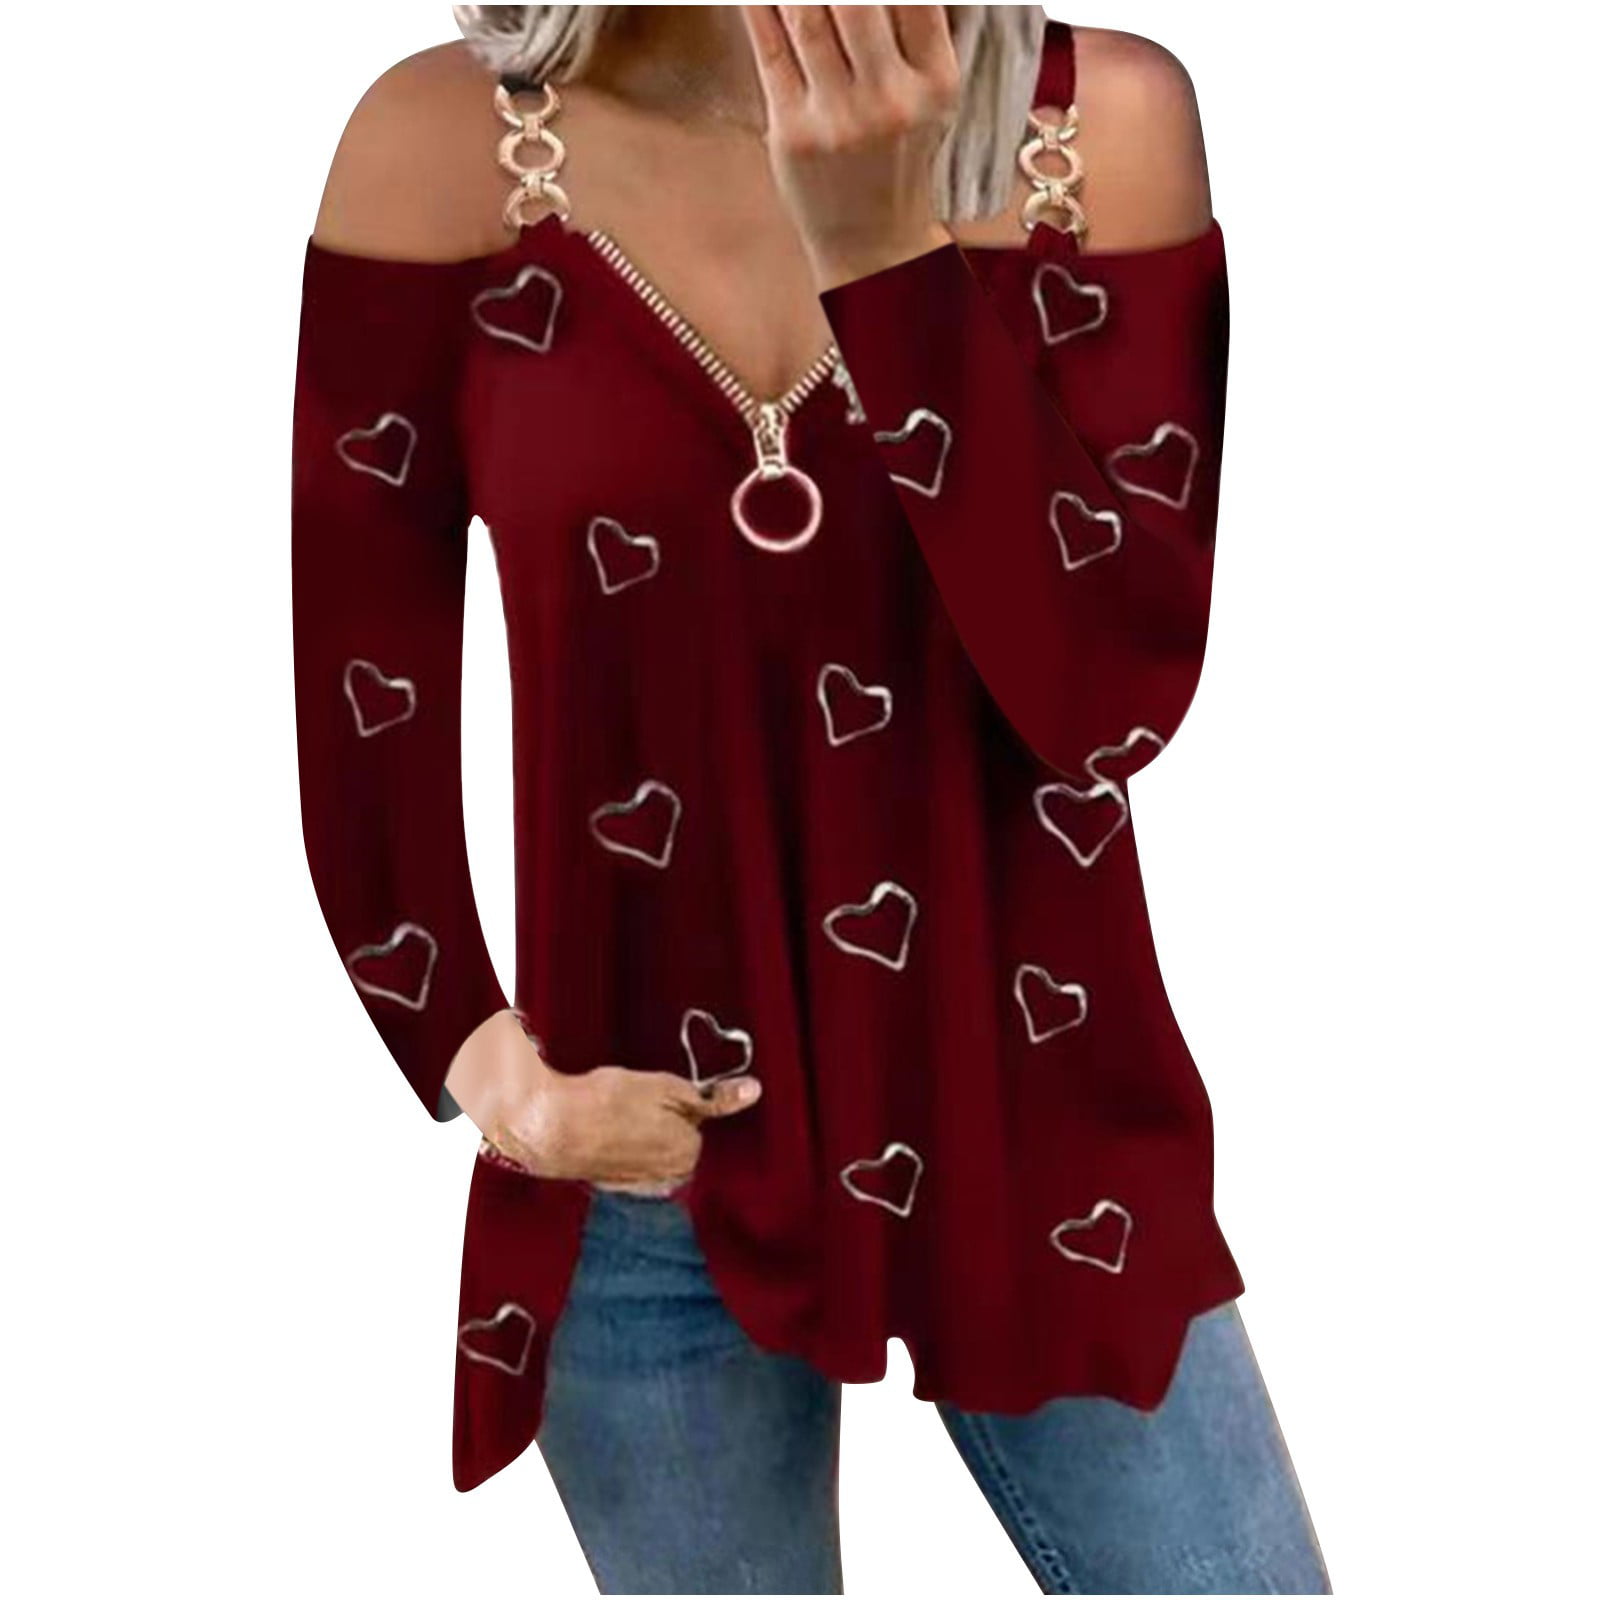 Casual Tee Top for Women,Zipper V-Neck Off Shoulder Swing Flowy Blouse Halloween Skull Print Lace Sleeve Loose Top 